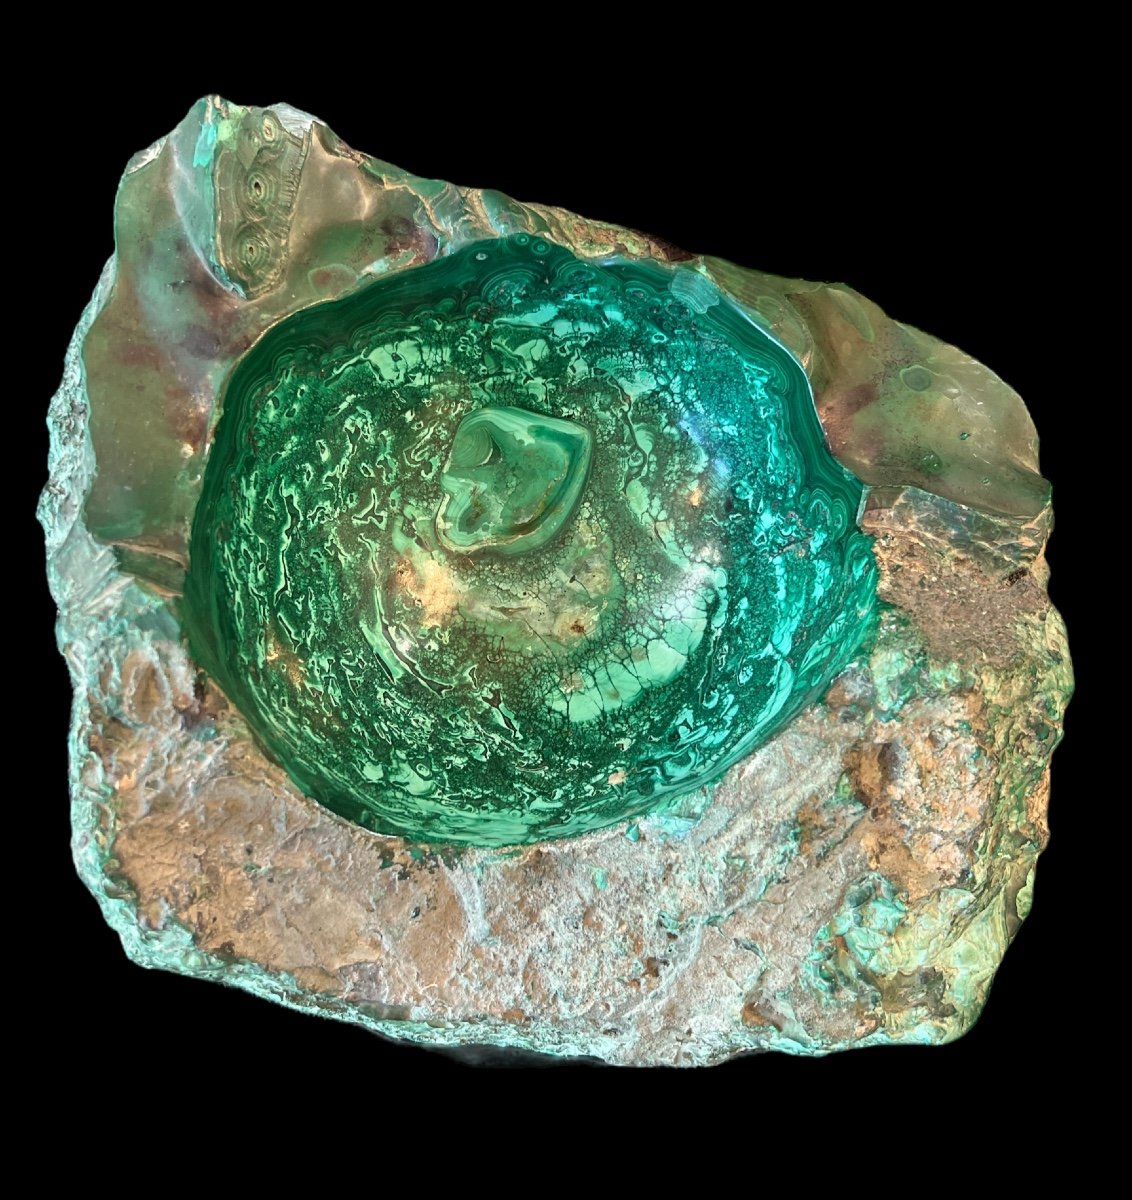 Huge Block Of 35 Kg Of Partially Polished Rough Malachite - Africa -photo-1